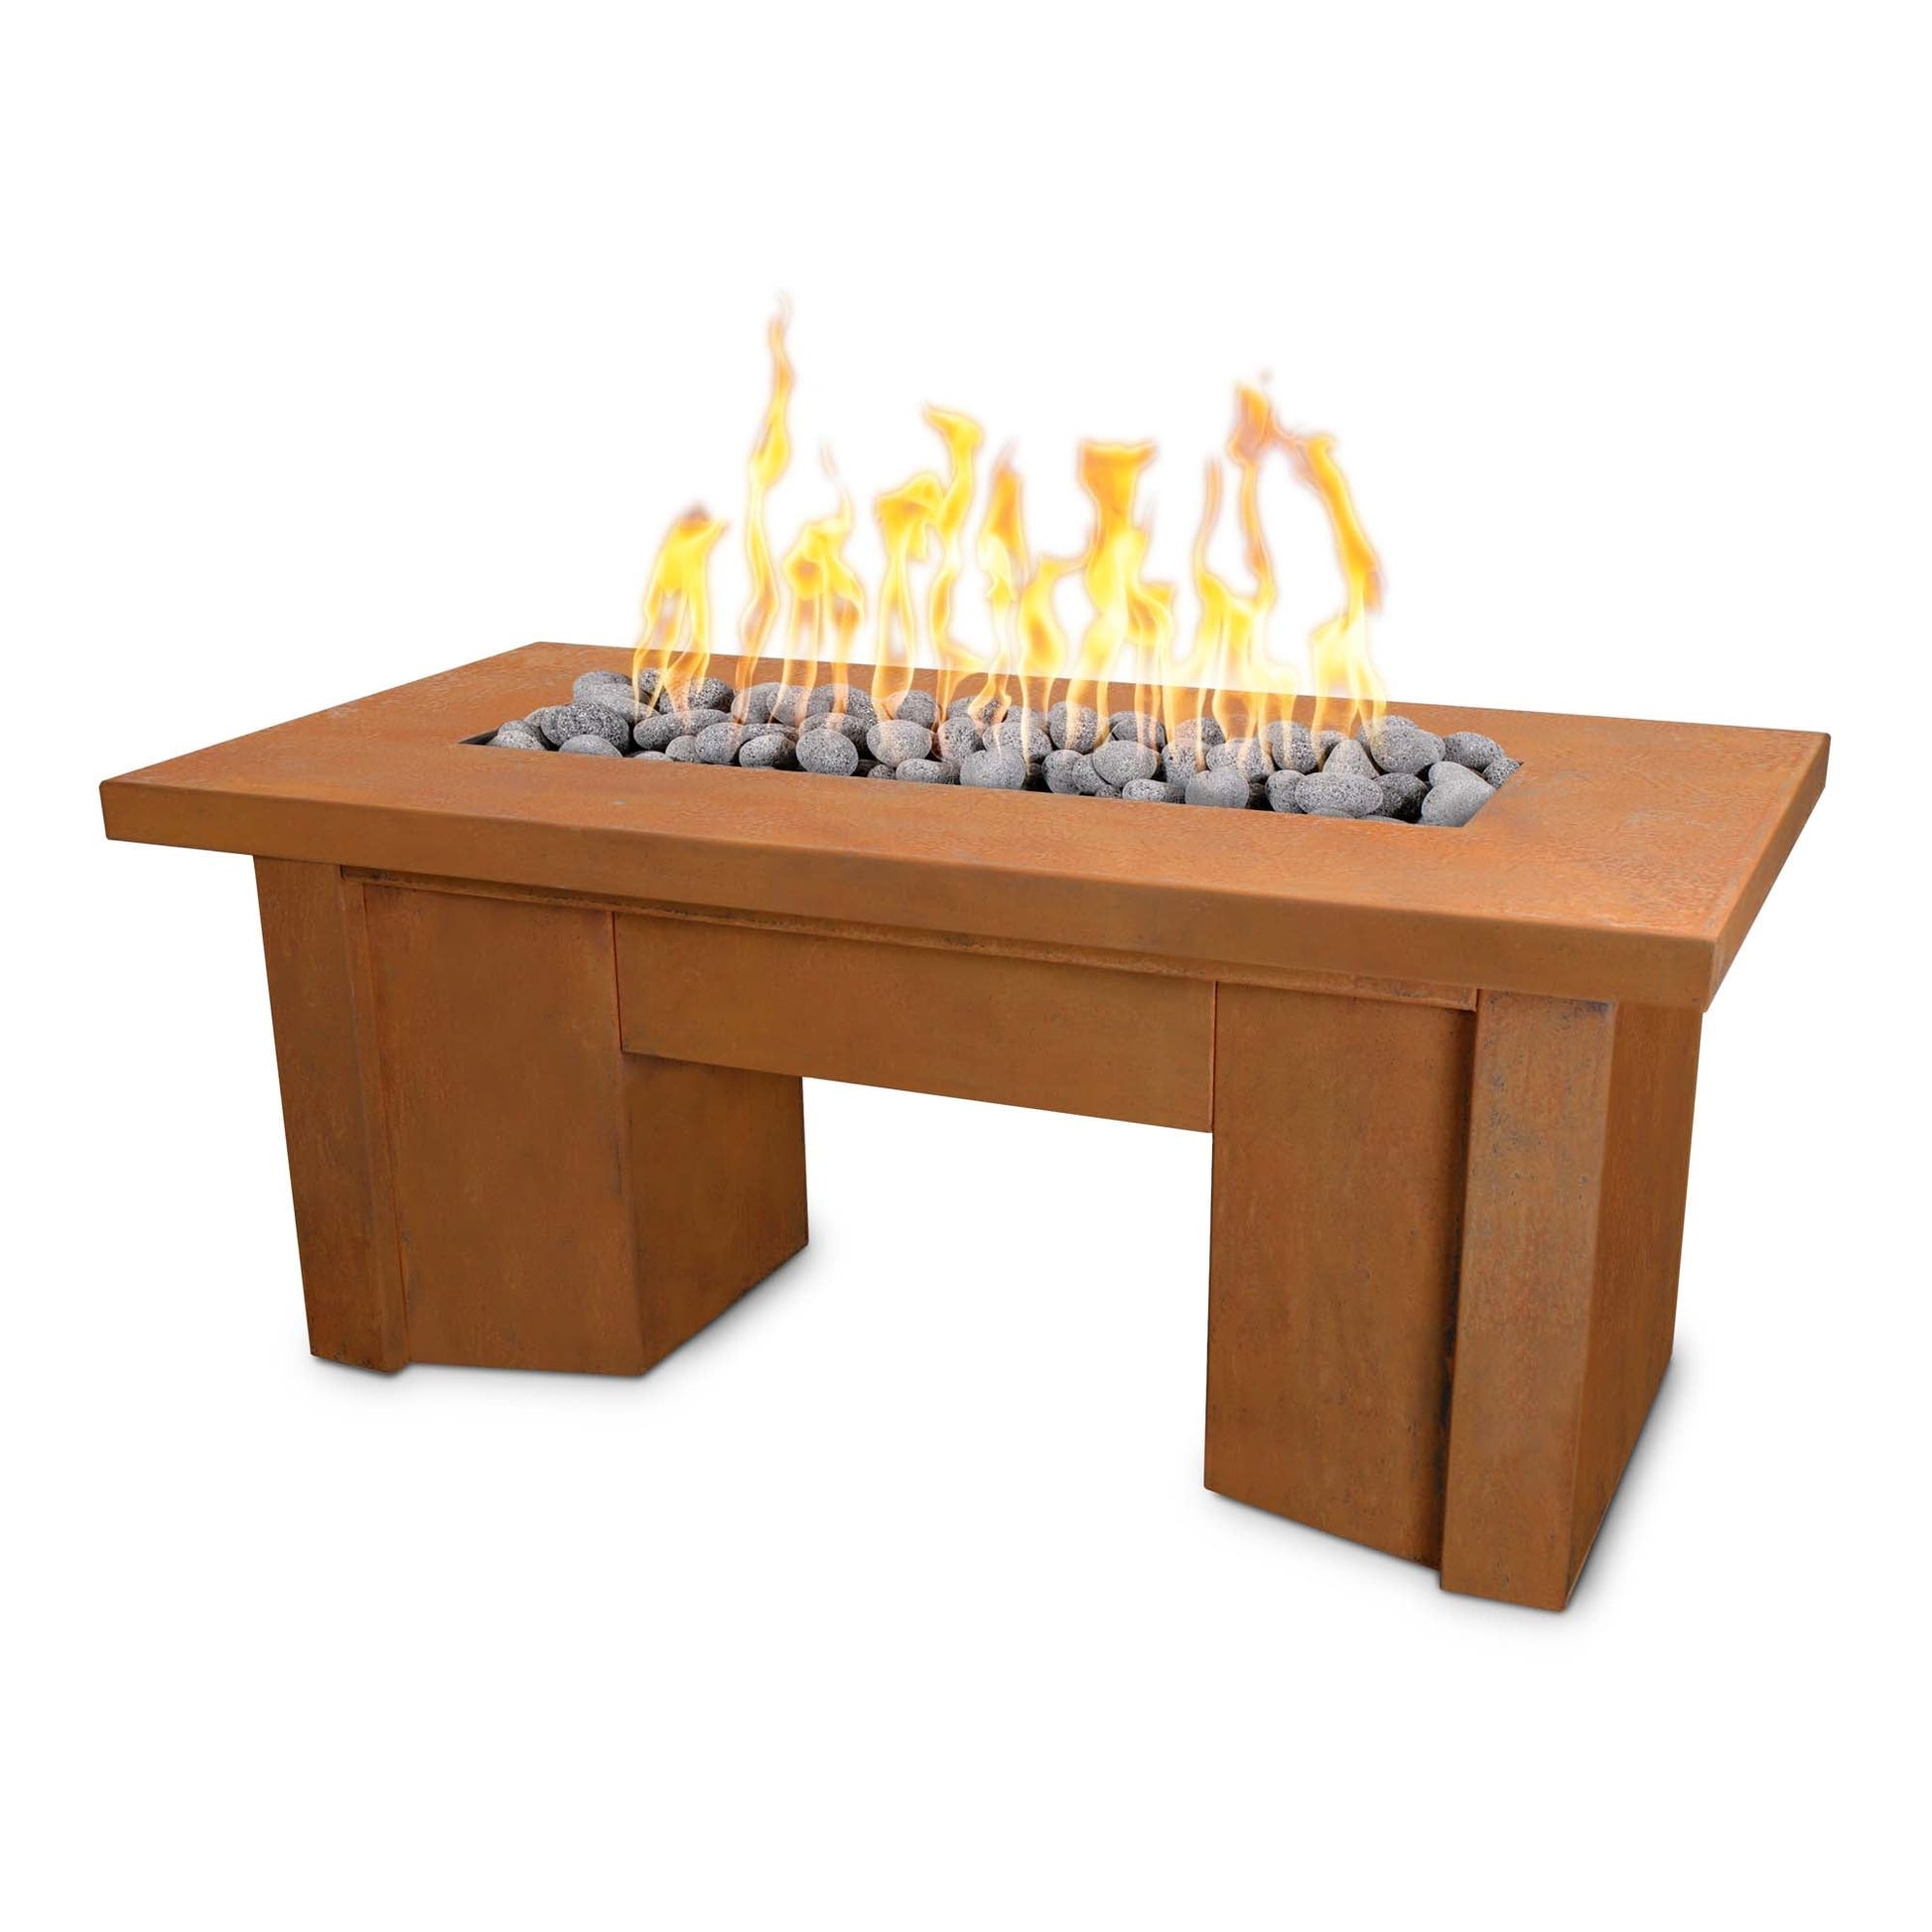 The Outdoor Plus Rectangular Alameda 60" Corten Steel Liquid Propane Fire Pit with 12V Electronic Ignition